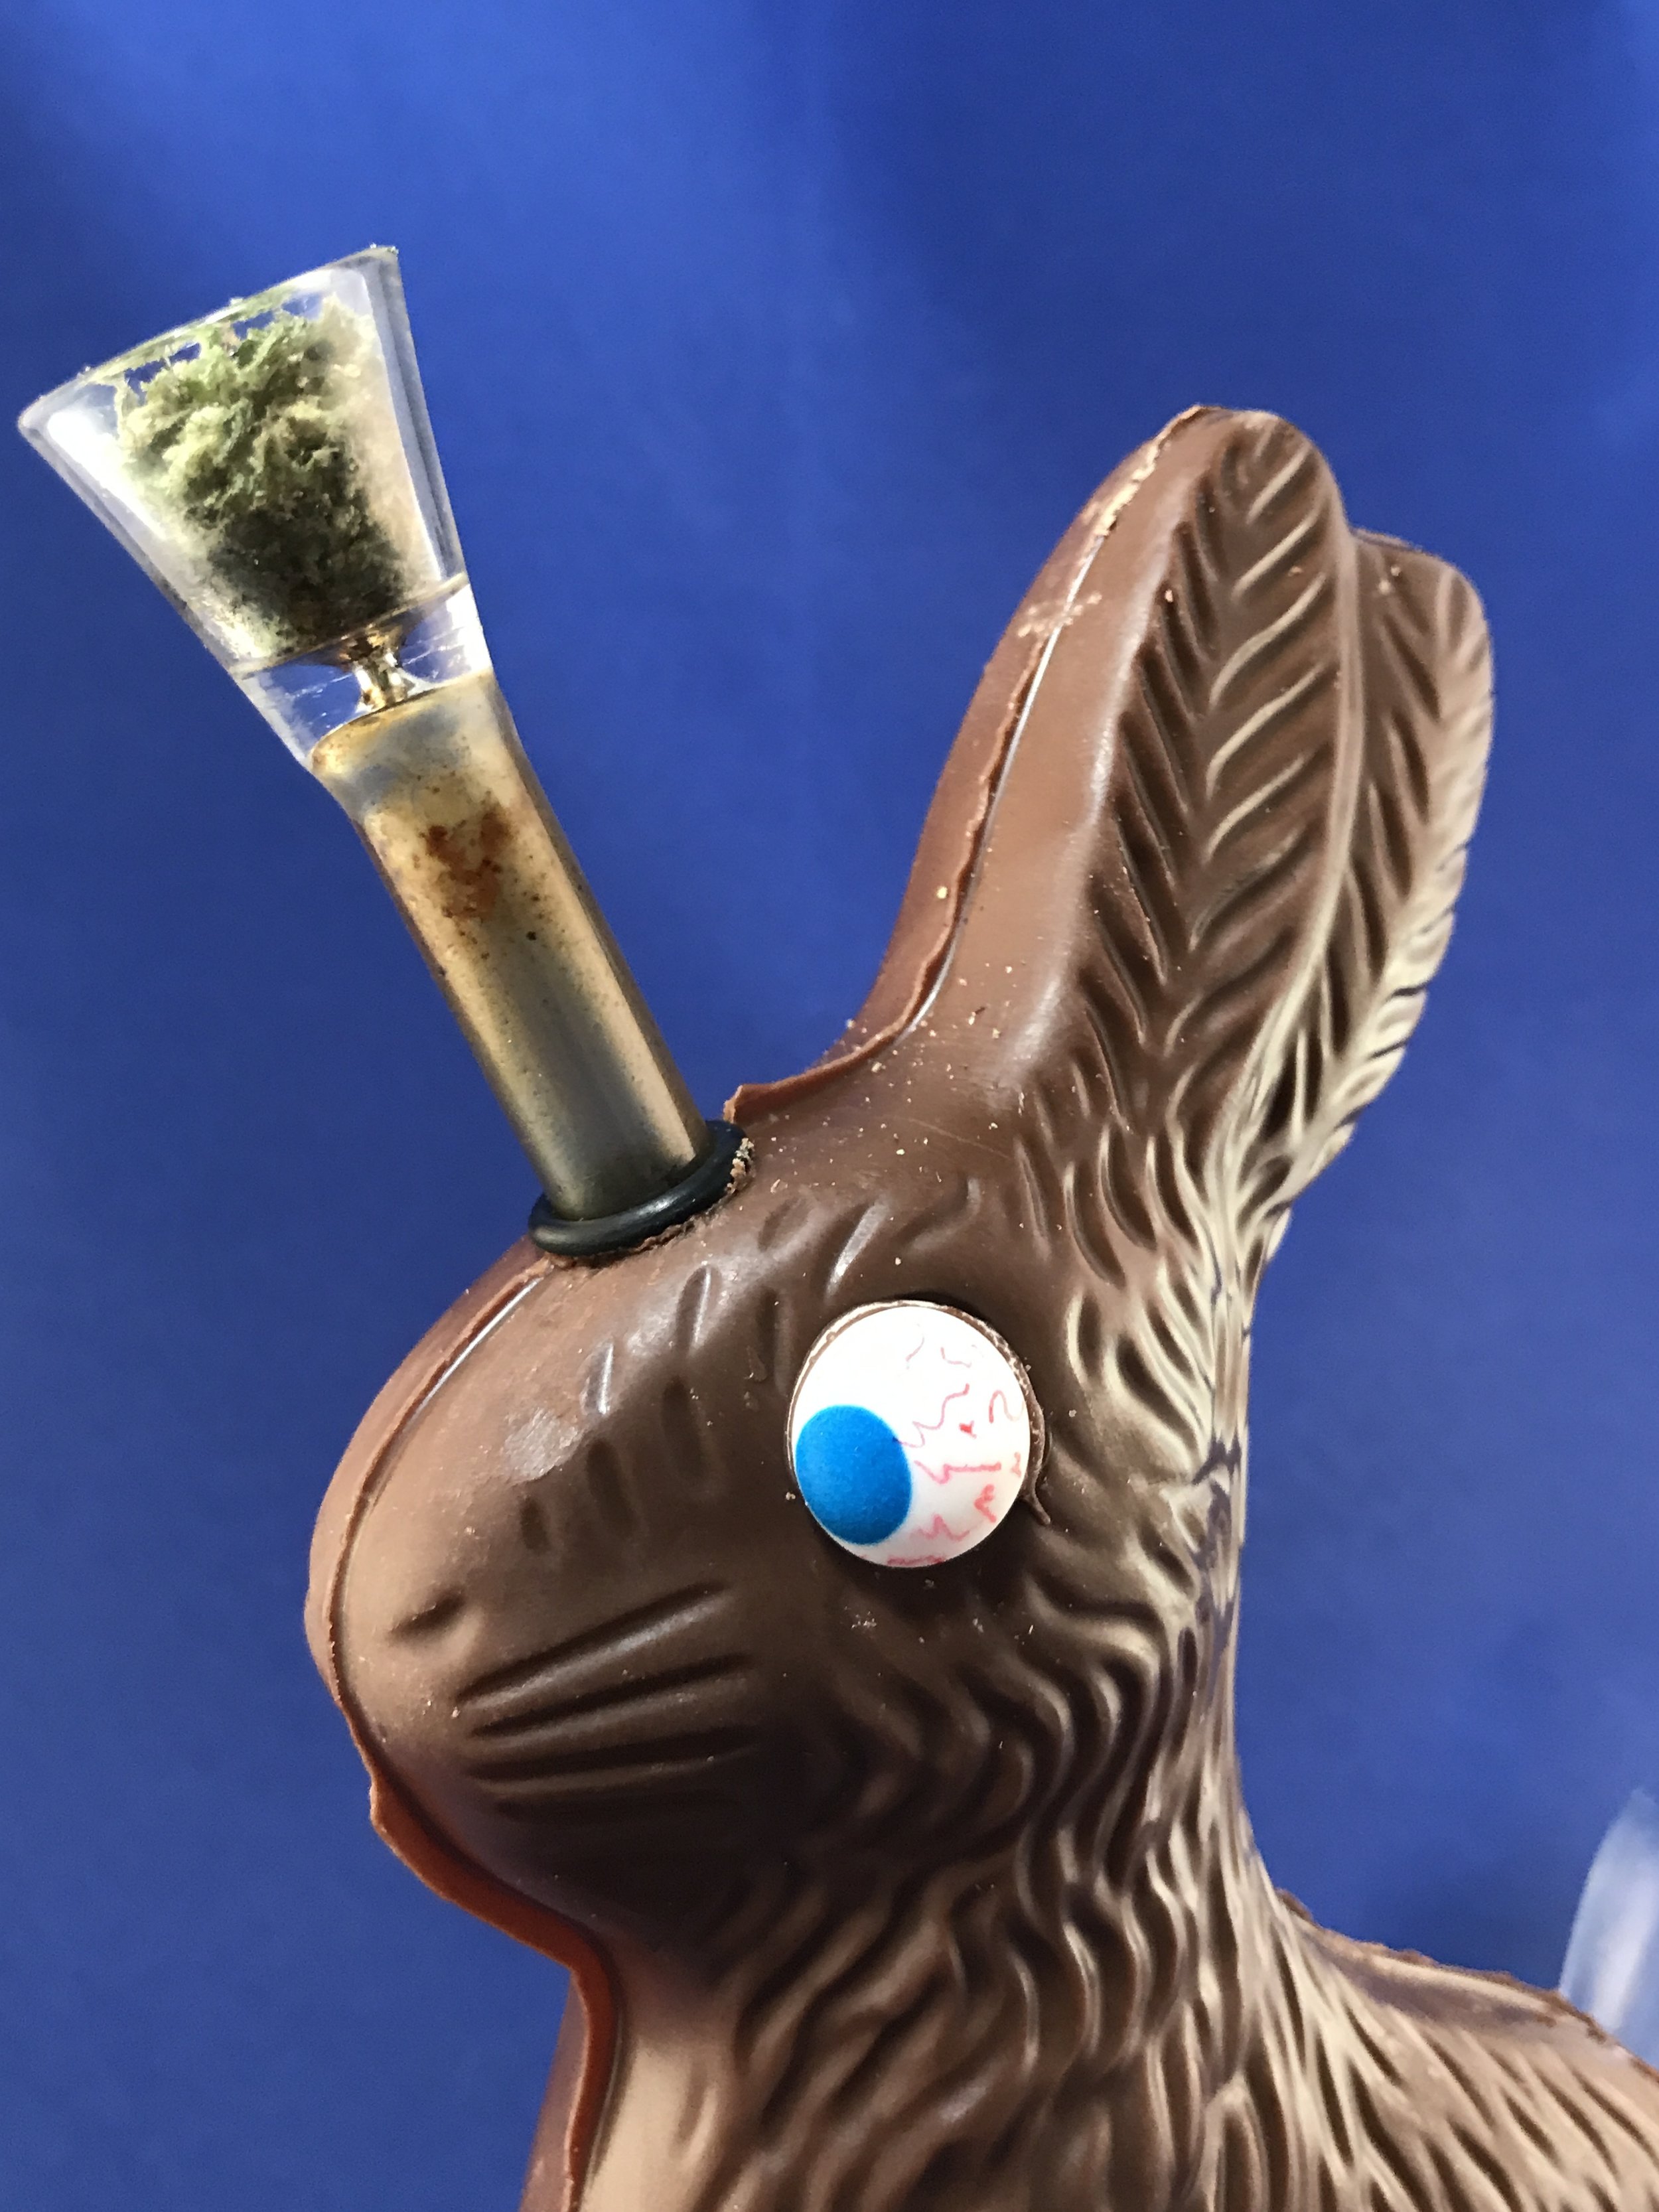 Stoner Crafts: DIY Chocolate Easter Bunny Bong by Chronic Crafter